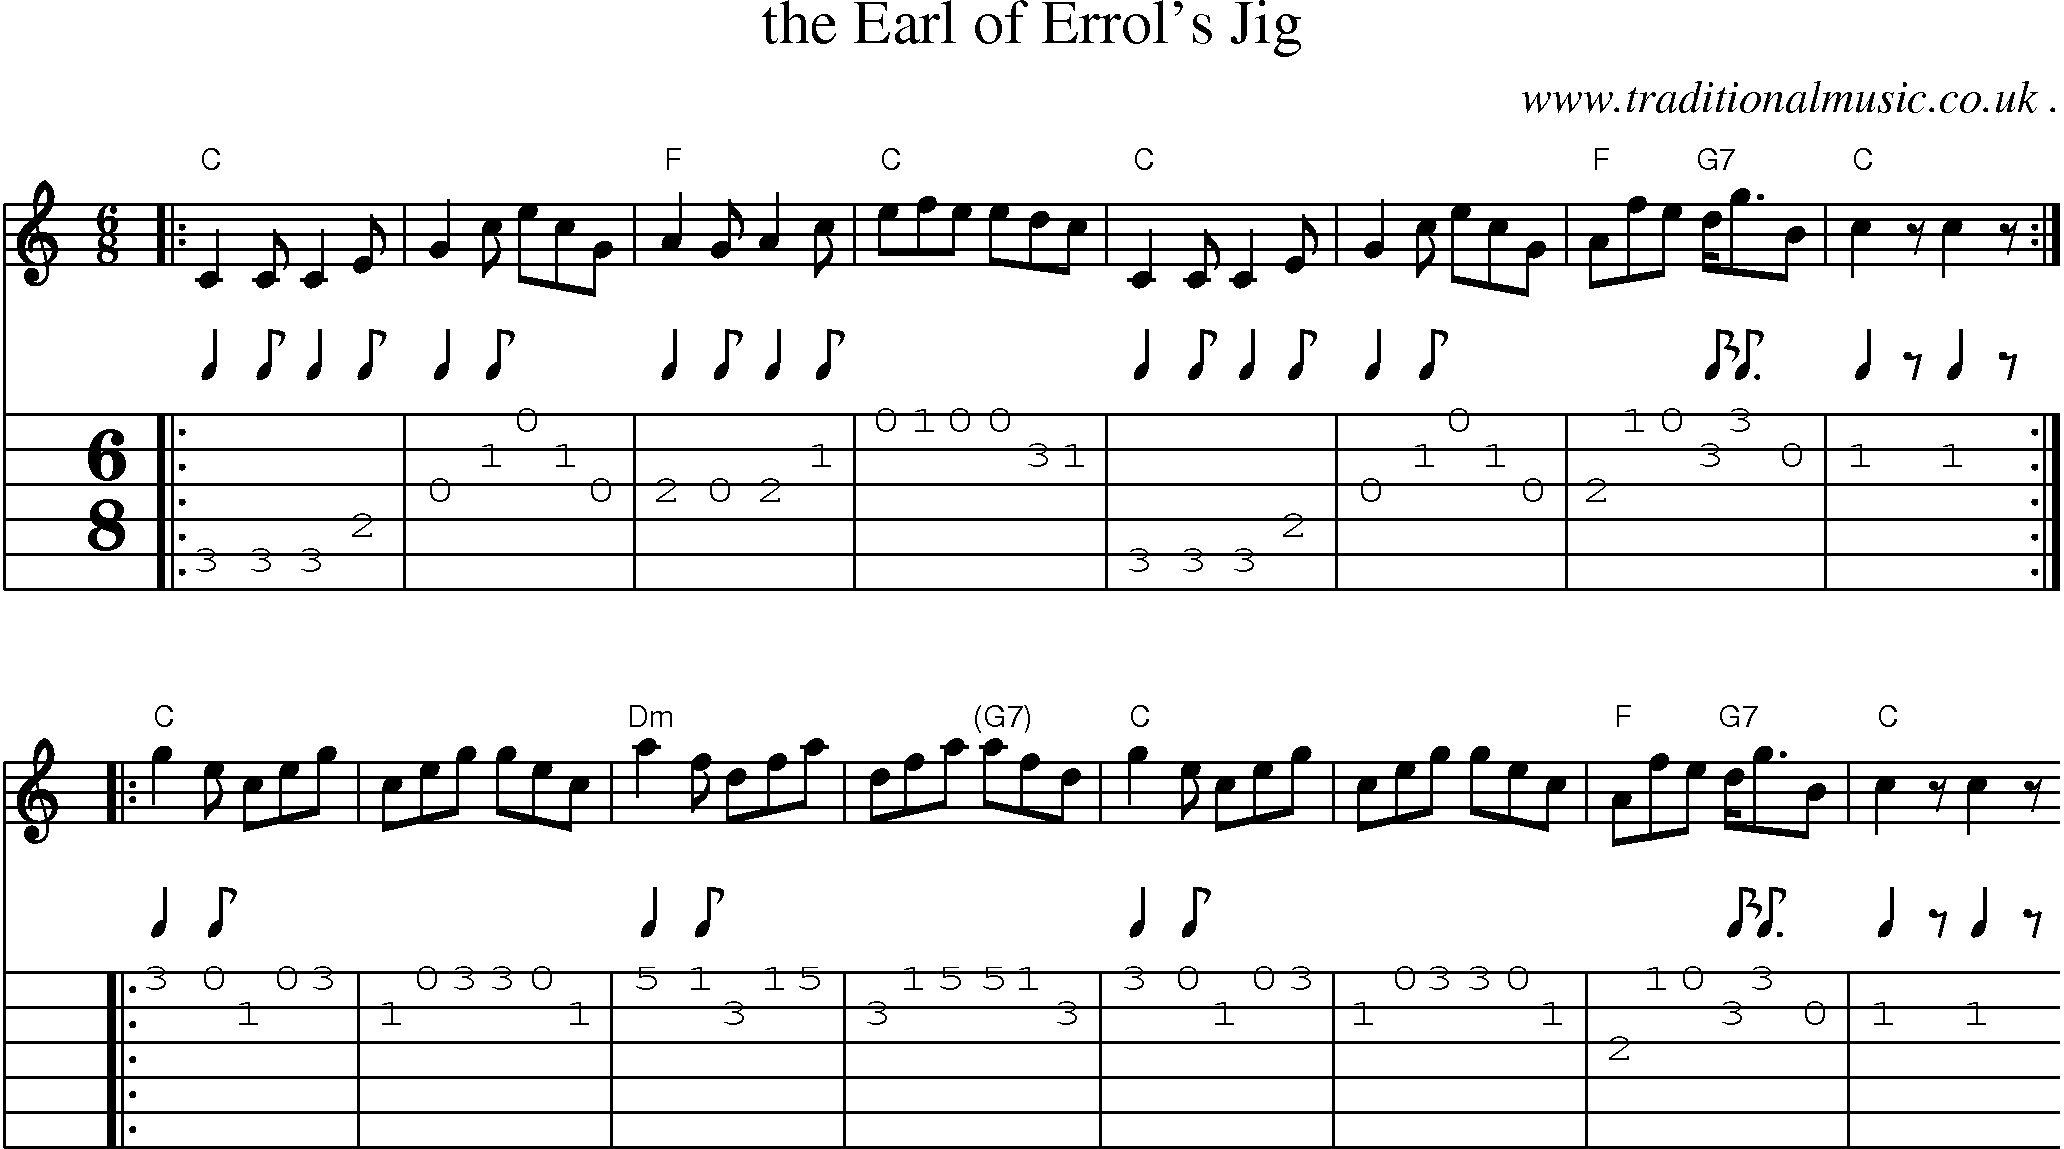 Sheet-music  score, Chords and Guitar Tabs for The Earl Of Errols Jig